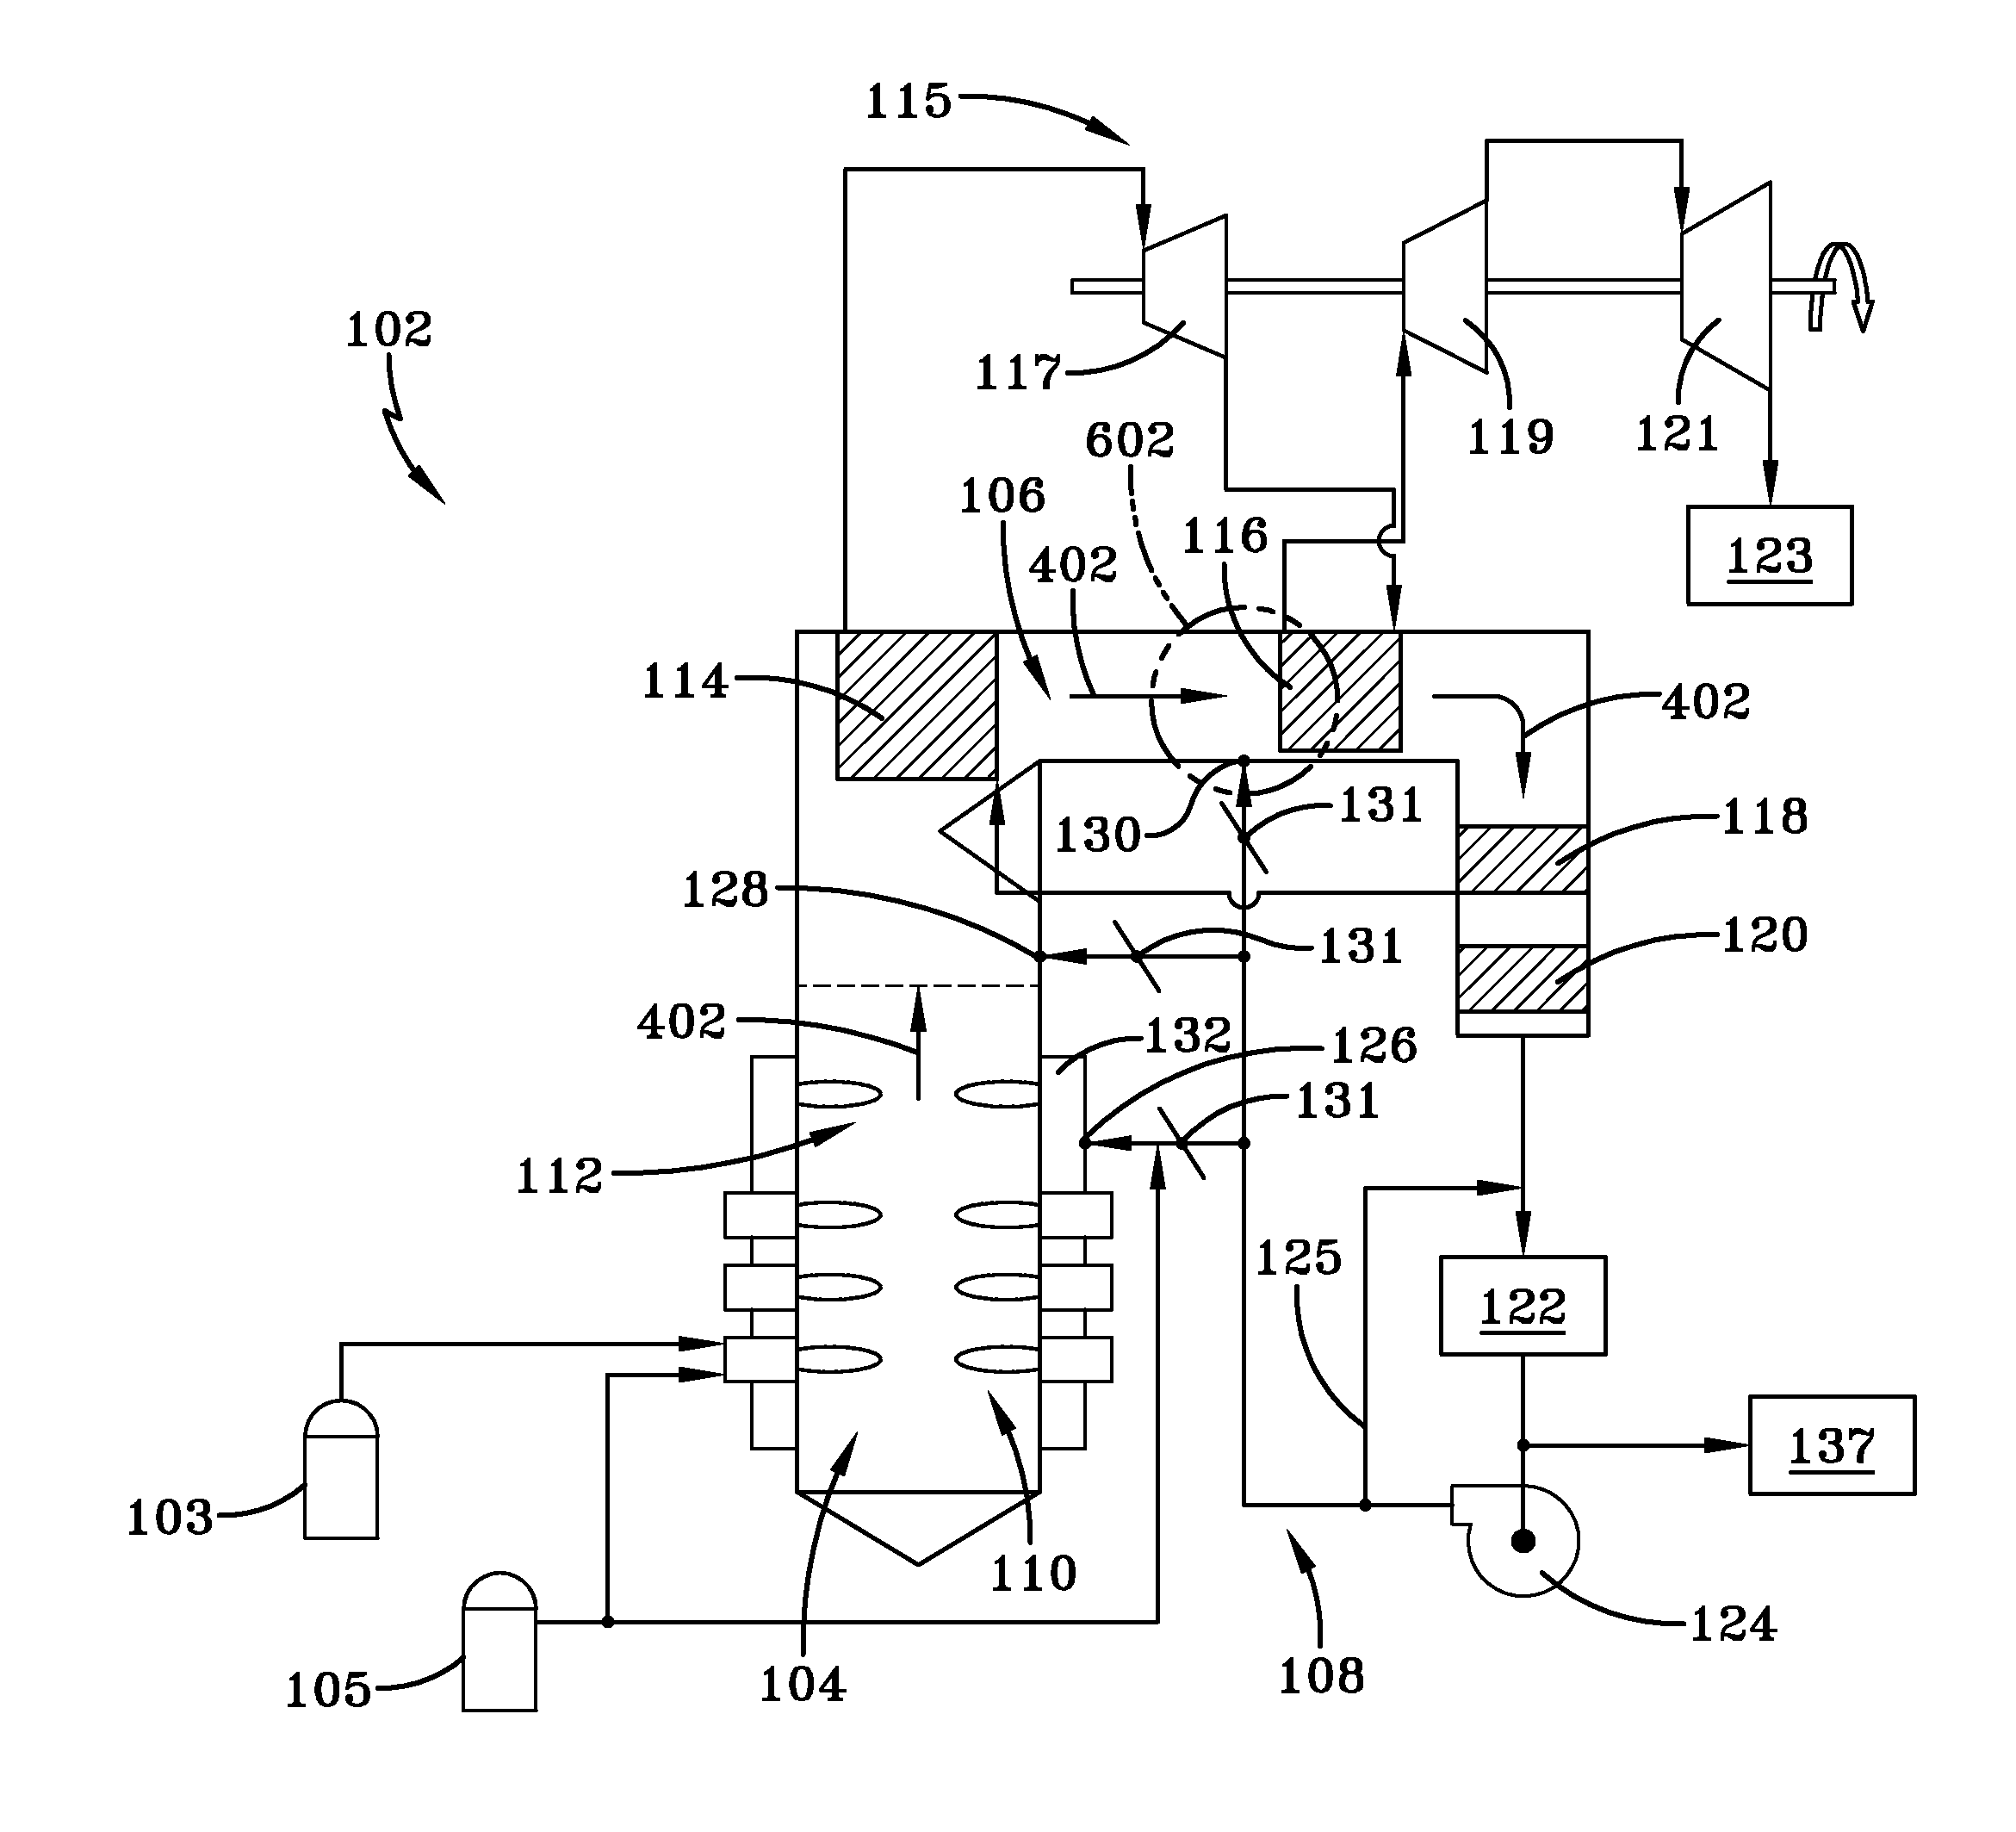 Process temperature control in oxy/fuel combustion system